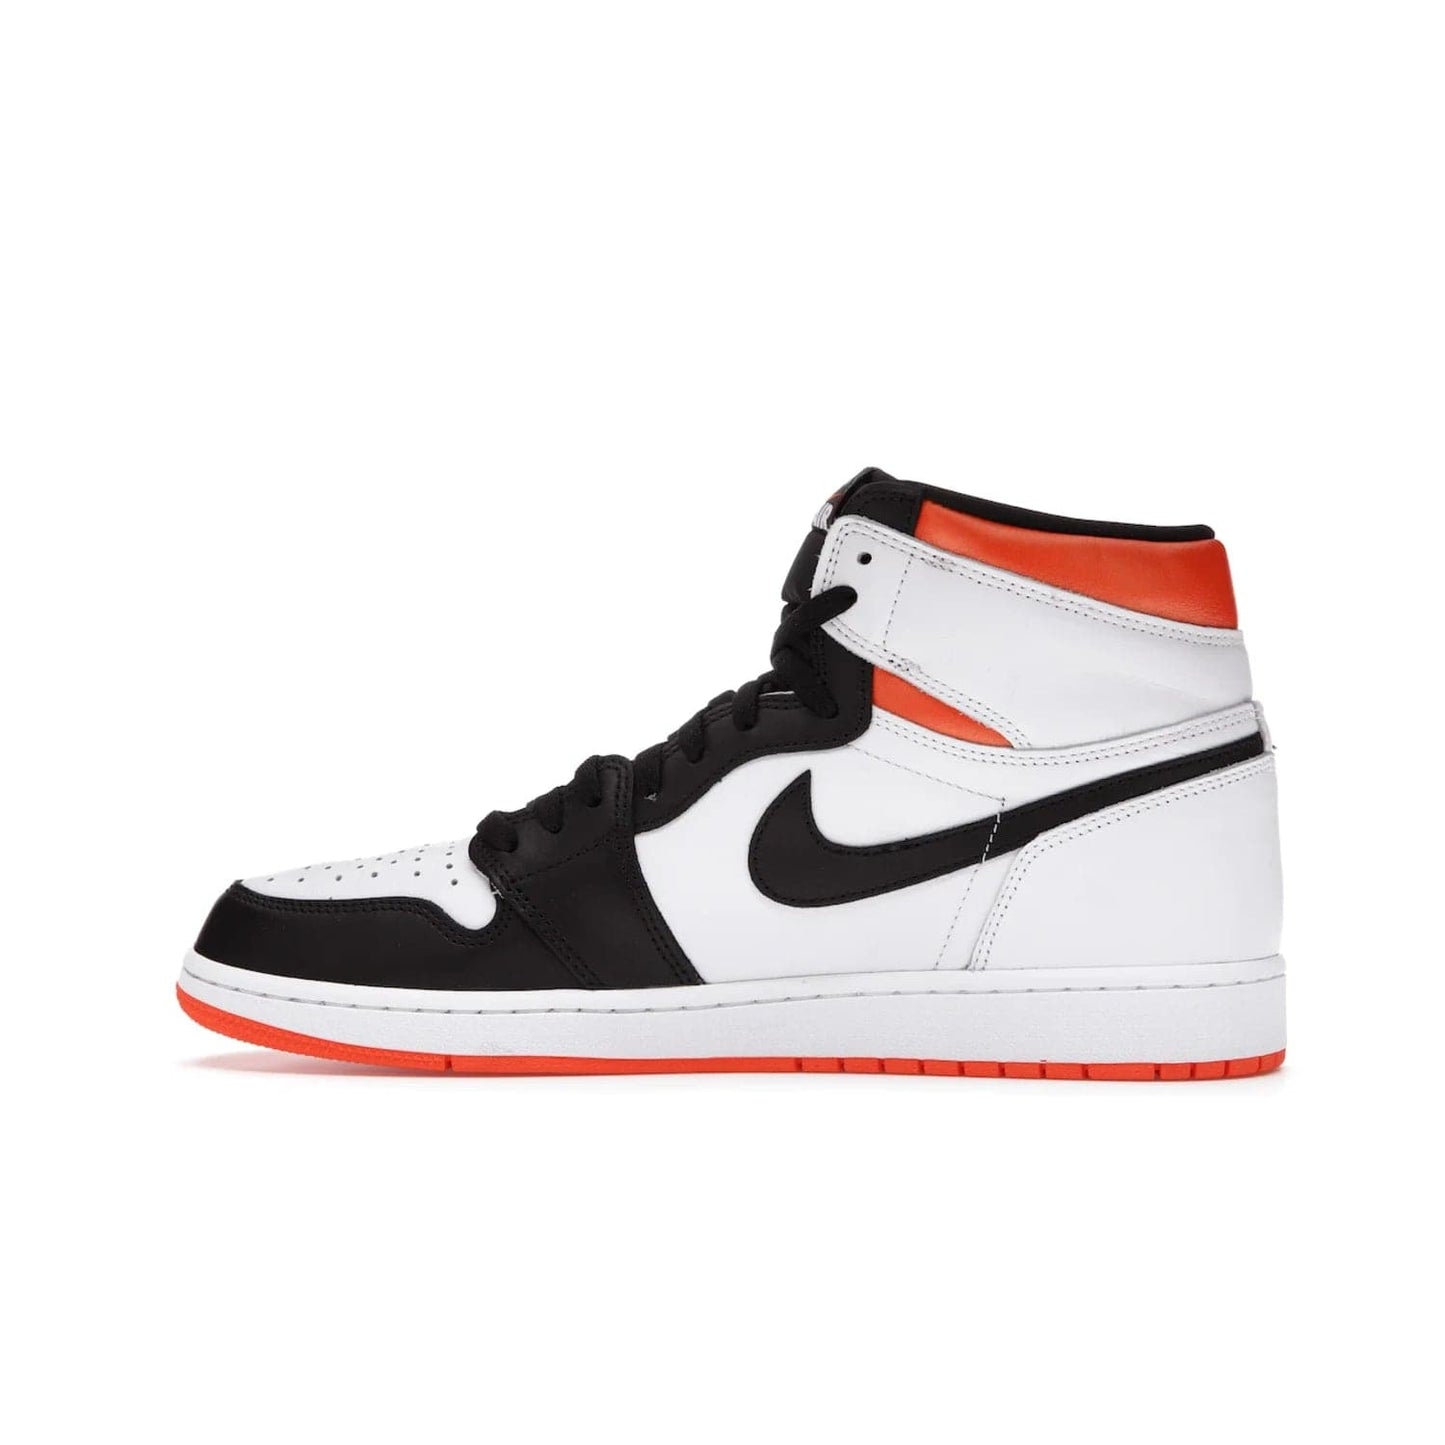 Jordan 1 Retro High Electro Orange - Image 20 - Only at www.BallersClubKickz.com - This Air Jordan 1 Retro High Electro Orange features a white leather upper with black overlays and vibrant Hyper Orange ankle wrap. Turn heads with this iconic design of woven tongue label and sole. Get yours today and add some serious style to your rotation.